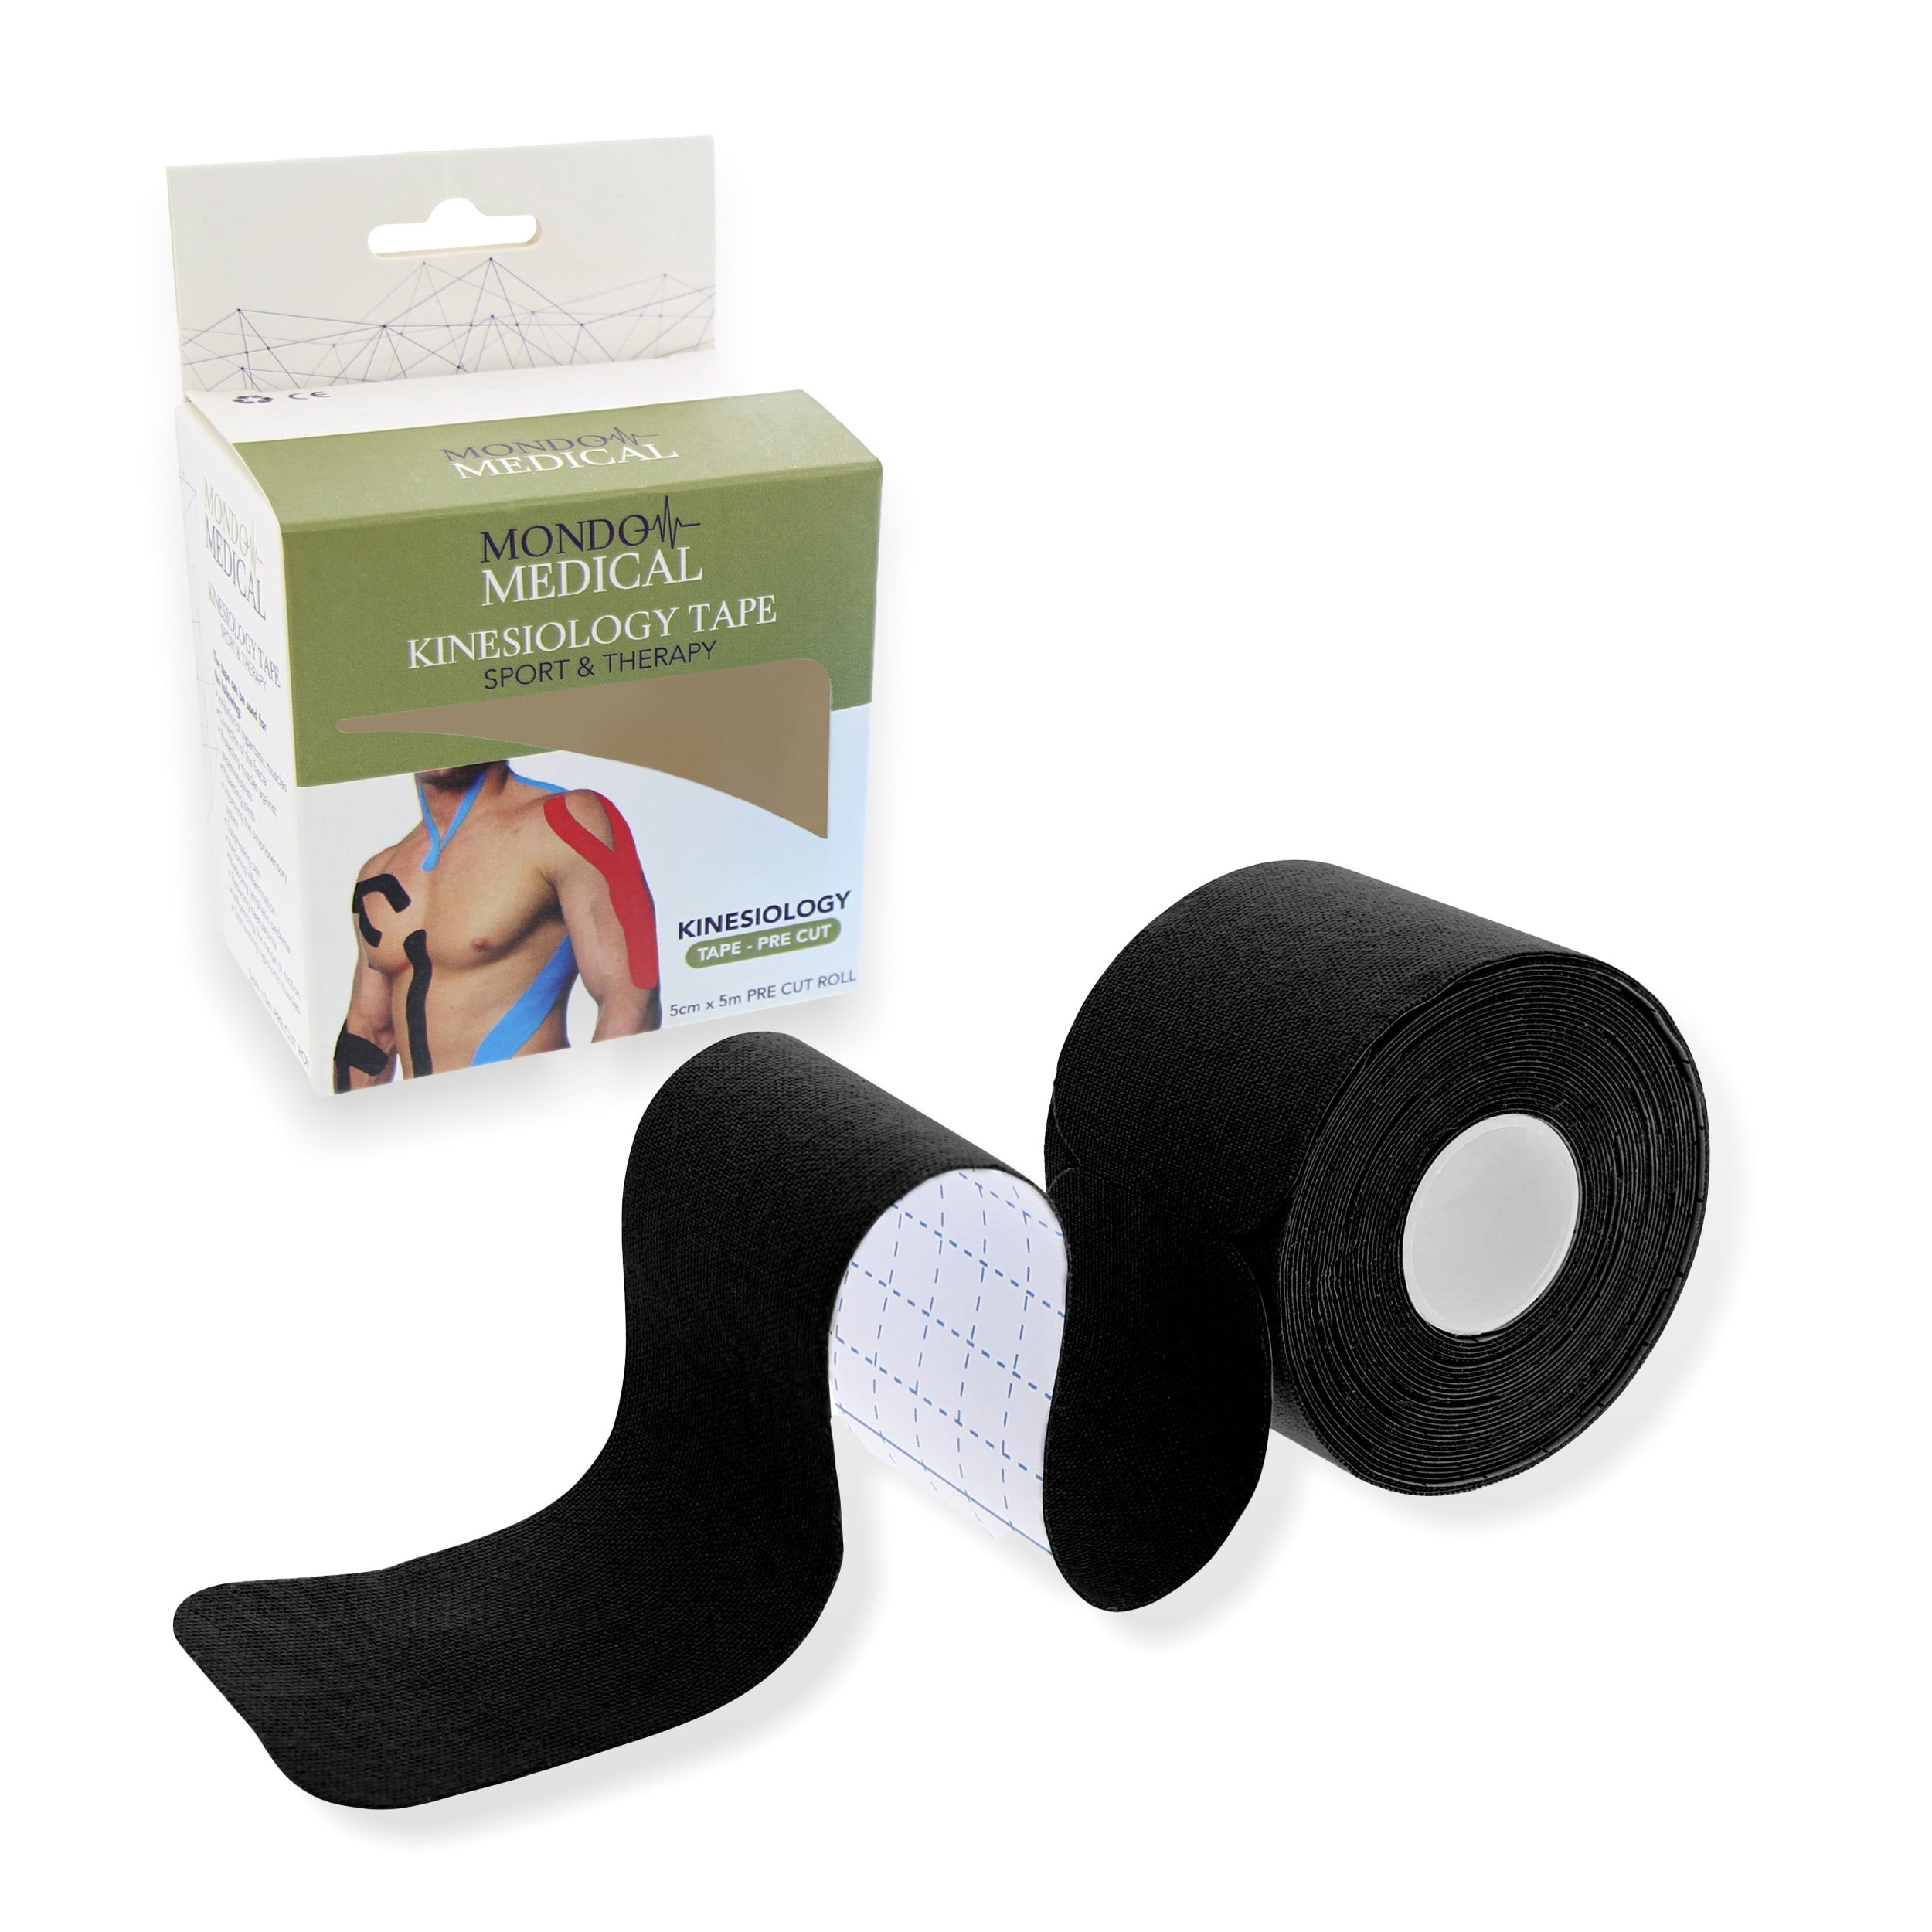 Supportables Body/Clothing Tape, 20 Feet